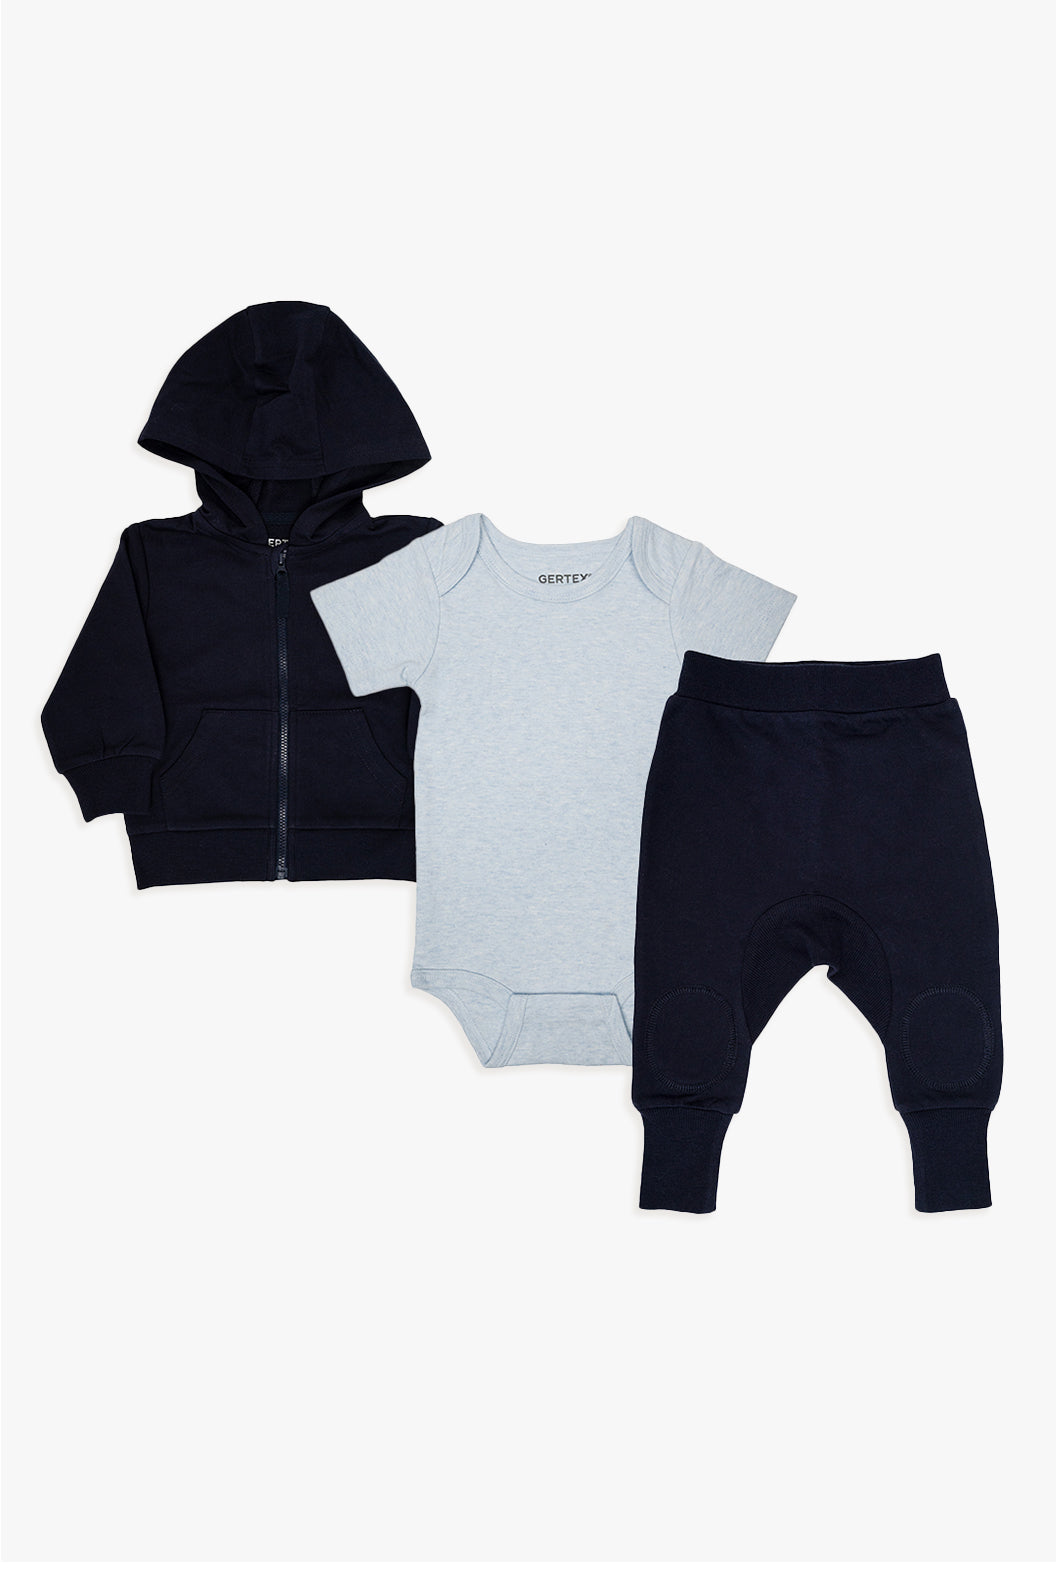 Baby French Terry Sweatsuit Bundle